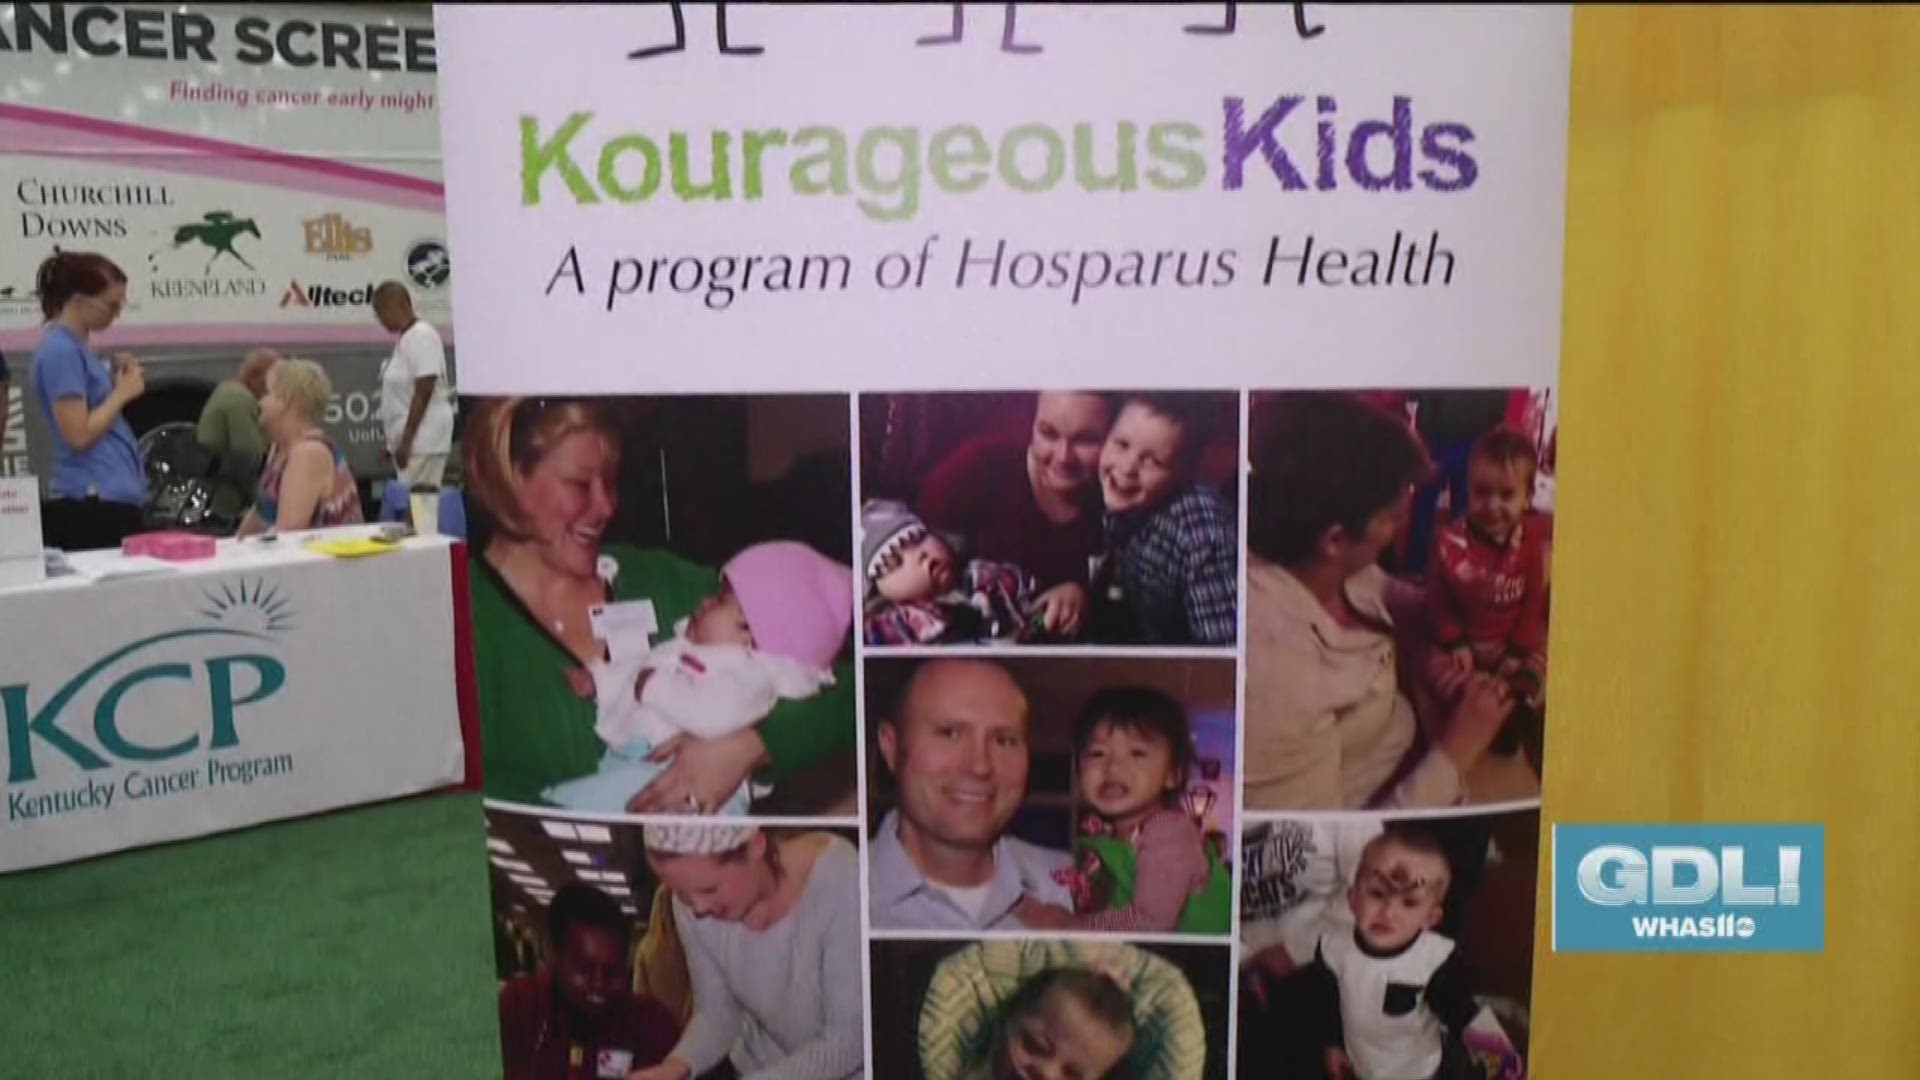 To find out more about Hosparus Health, go to HosparusHealth.org or call 1-800-264-0521.